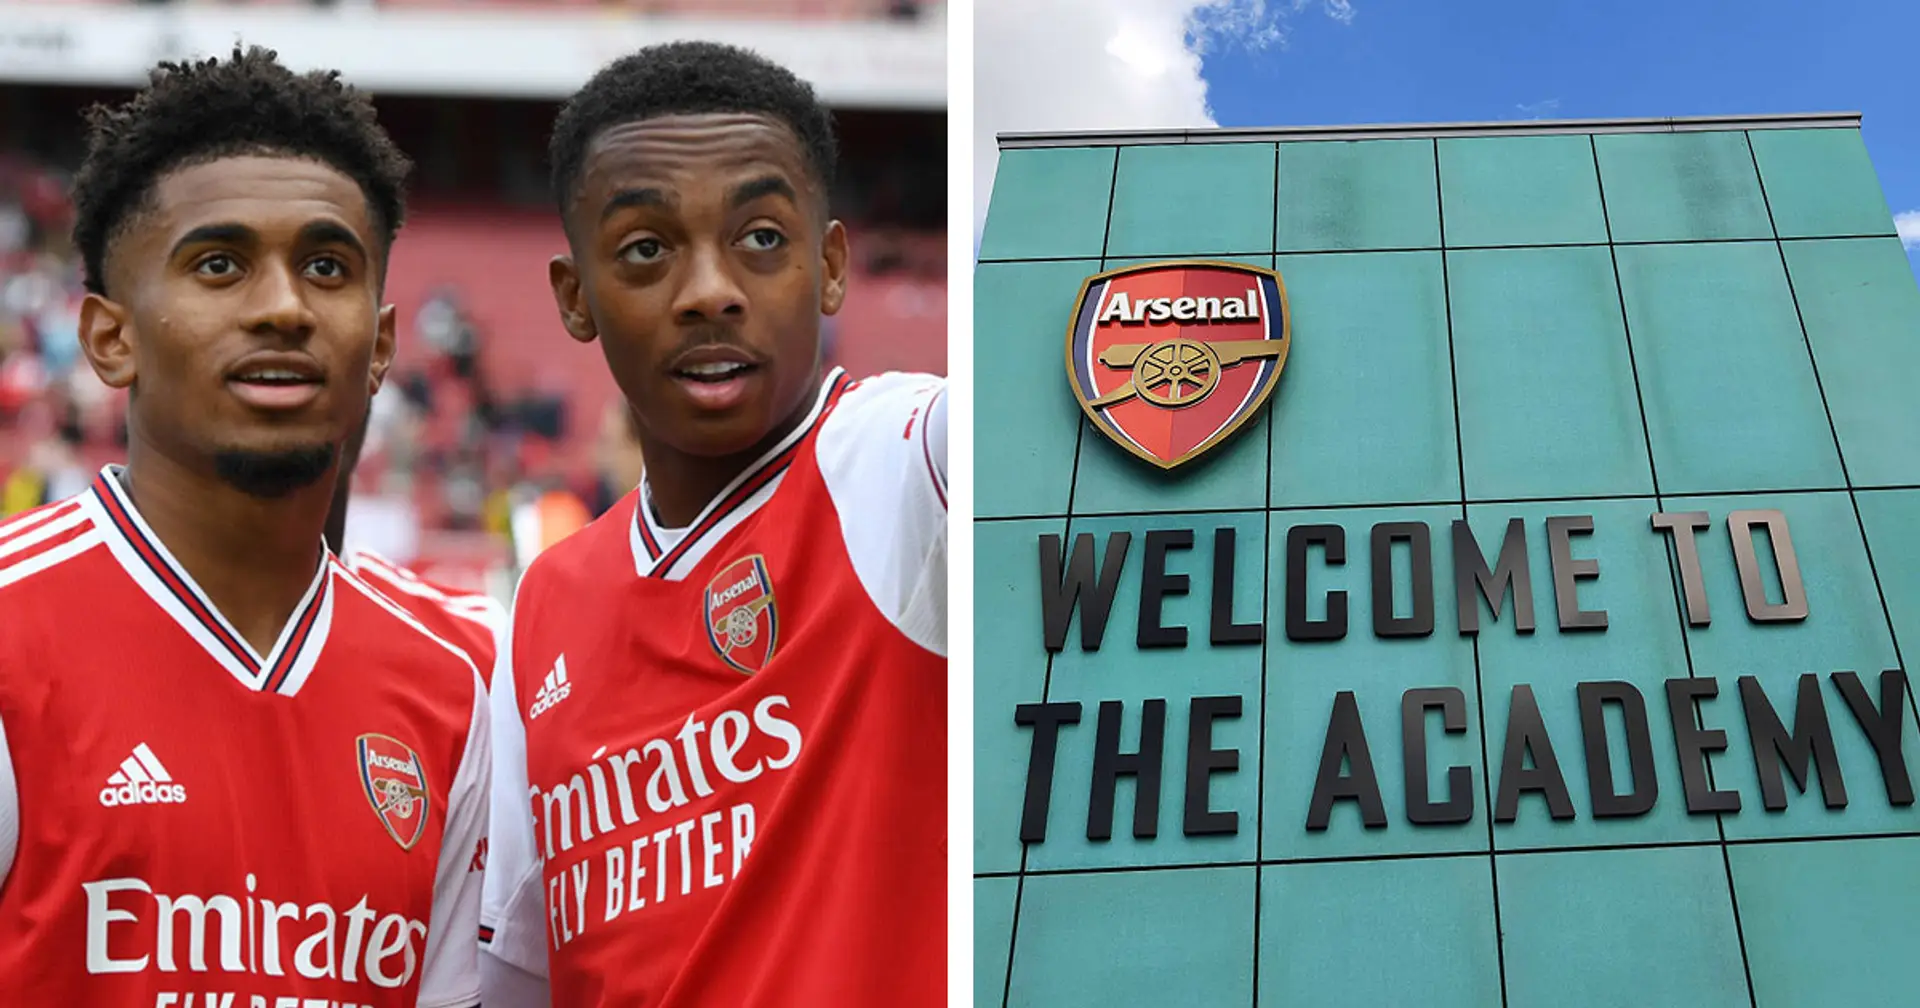 'Grey space' players & Brexit: Arsenal's new youth recruitment policy explained